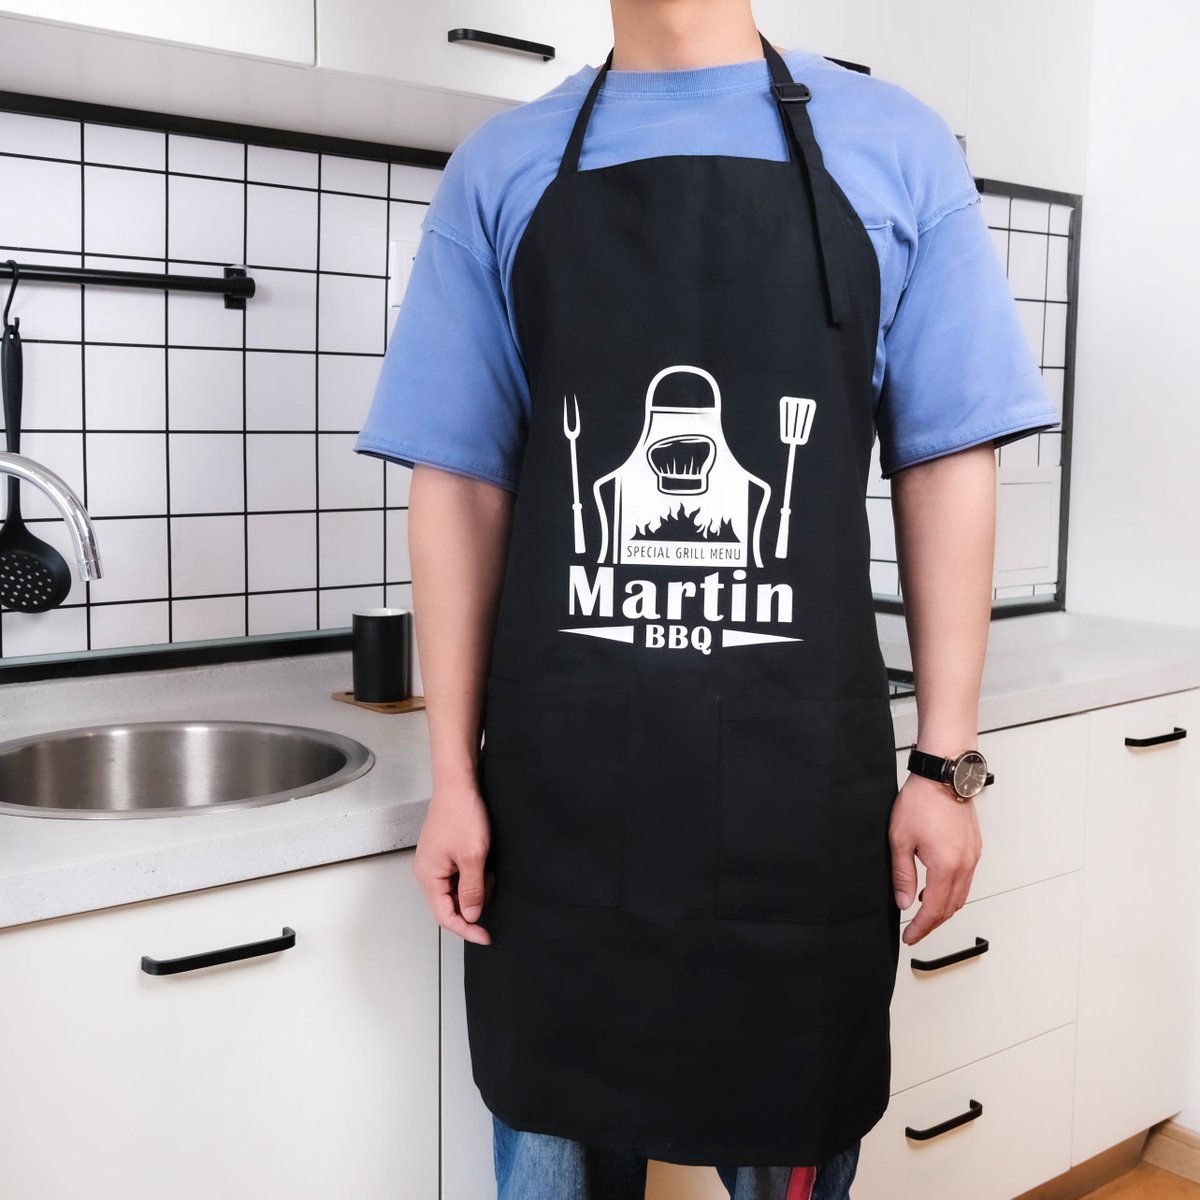 Father's Day is coming, so send an apron to your dear dad.
etsy.me/34DSra5 
#black #birthday #fathersday #apron #apronformen #kitchengift #bbq #grillingapron